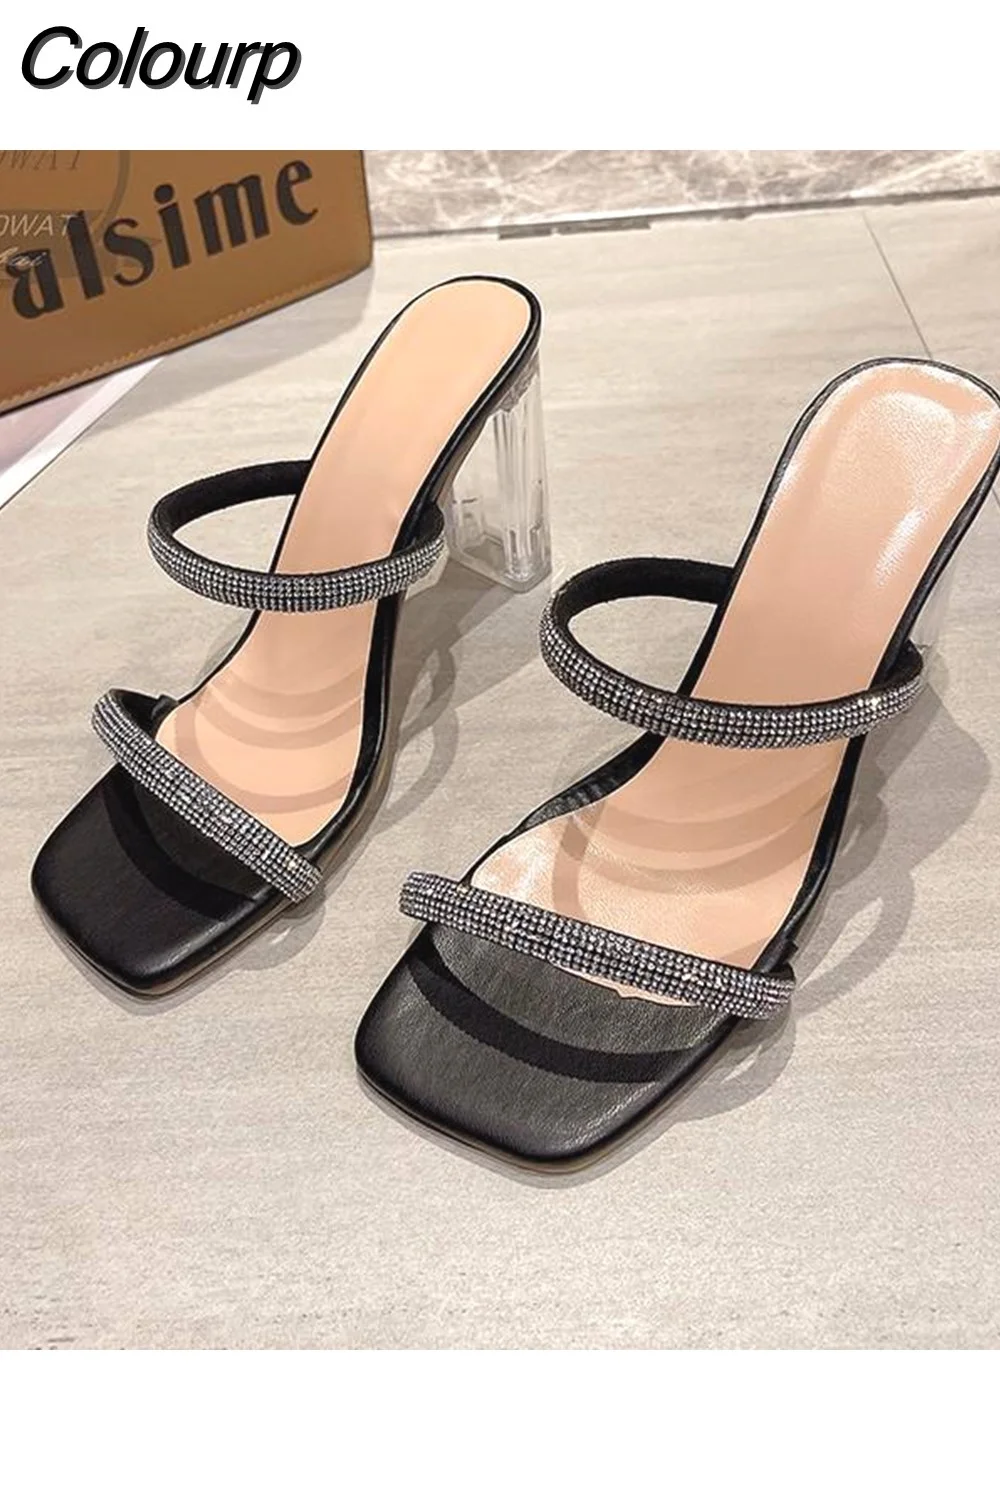 Colourp Slippers Female Shoes Fashion Rhinestone New Summer Shoes Women Party Crystal Clear Cool Mules Slide Open Toe 2023